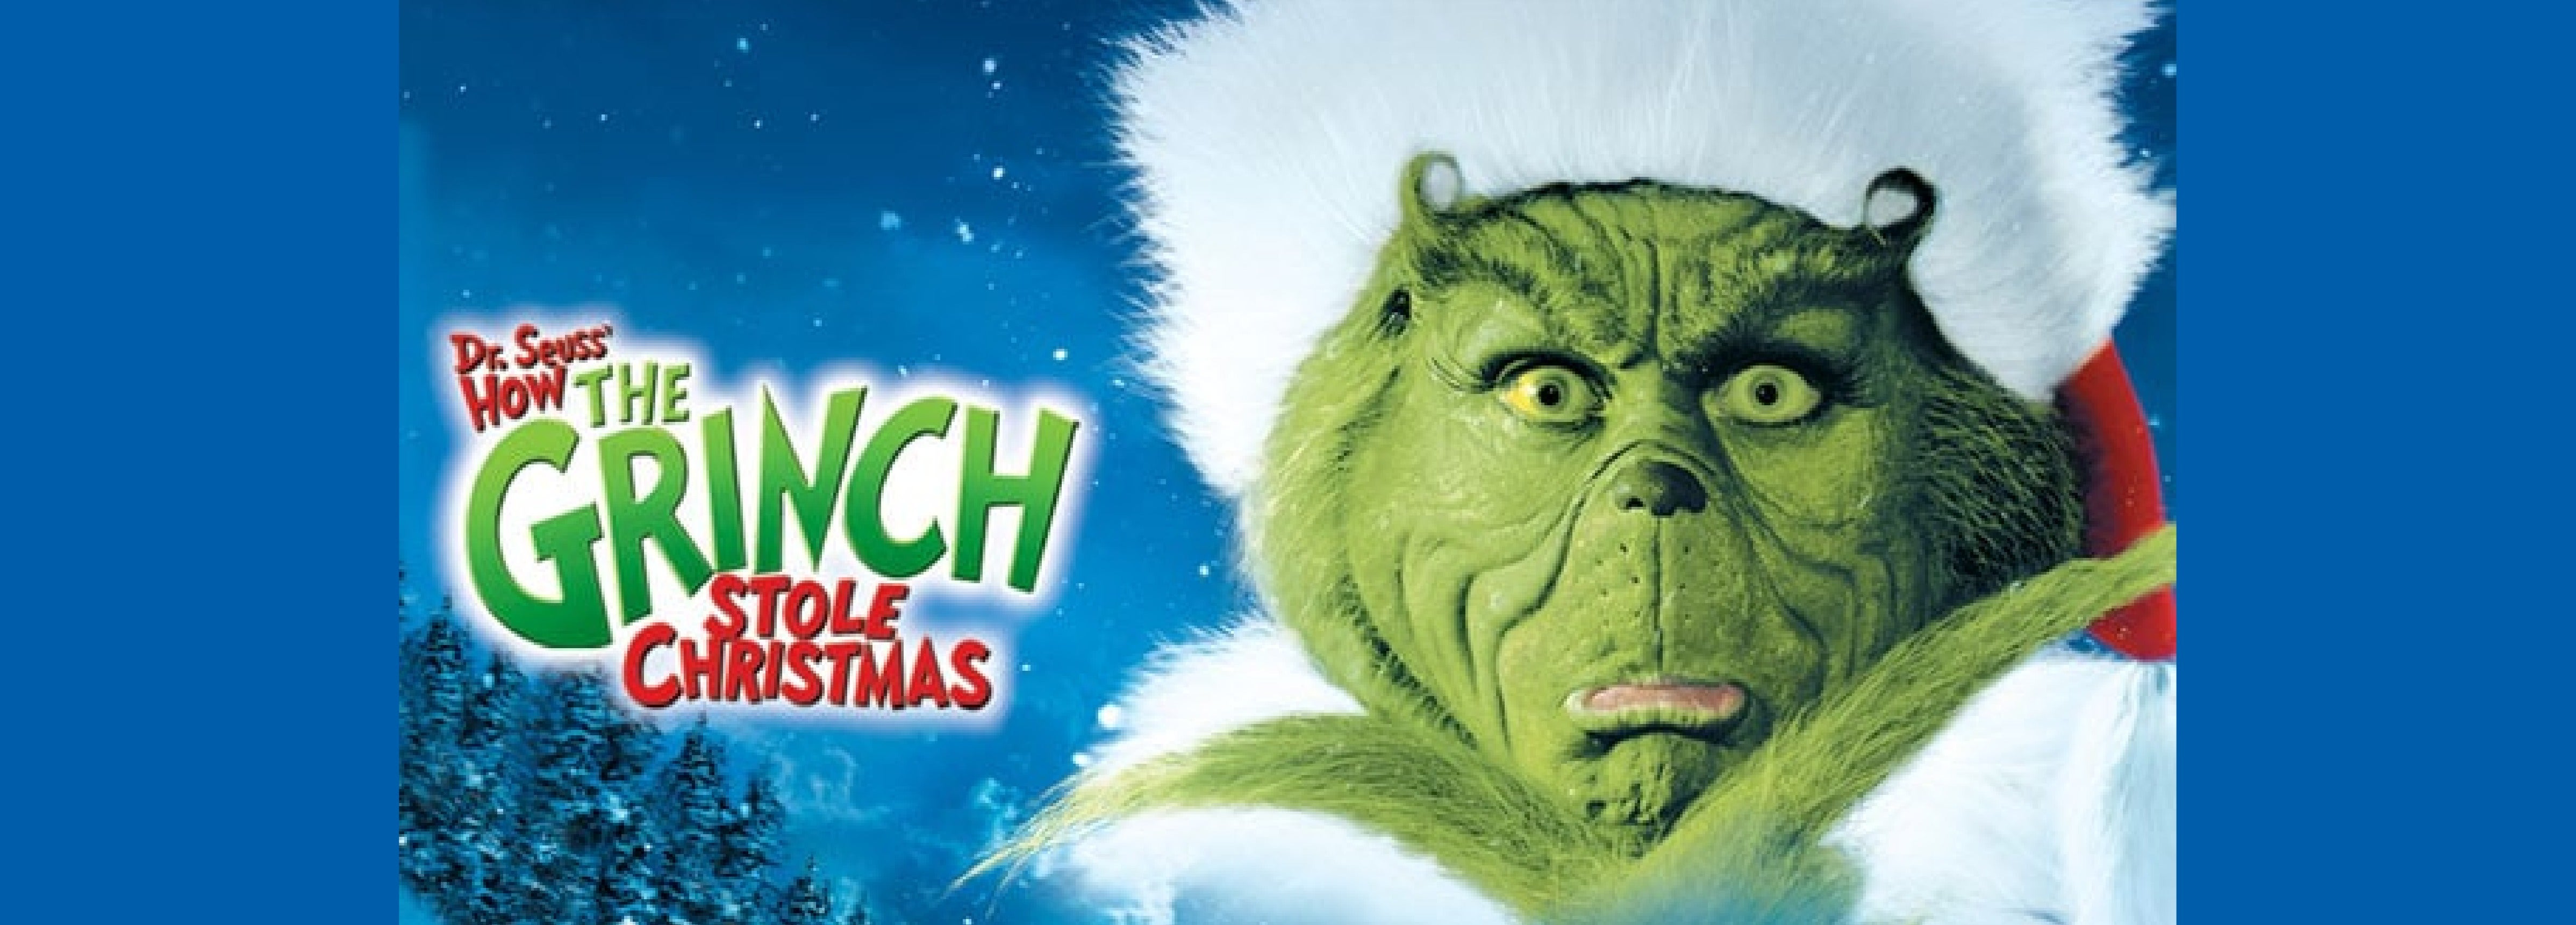 Dr. Seuss' How The Grinch Stole Christmas (PG) | Oxford Performing Arts